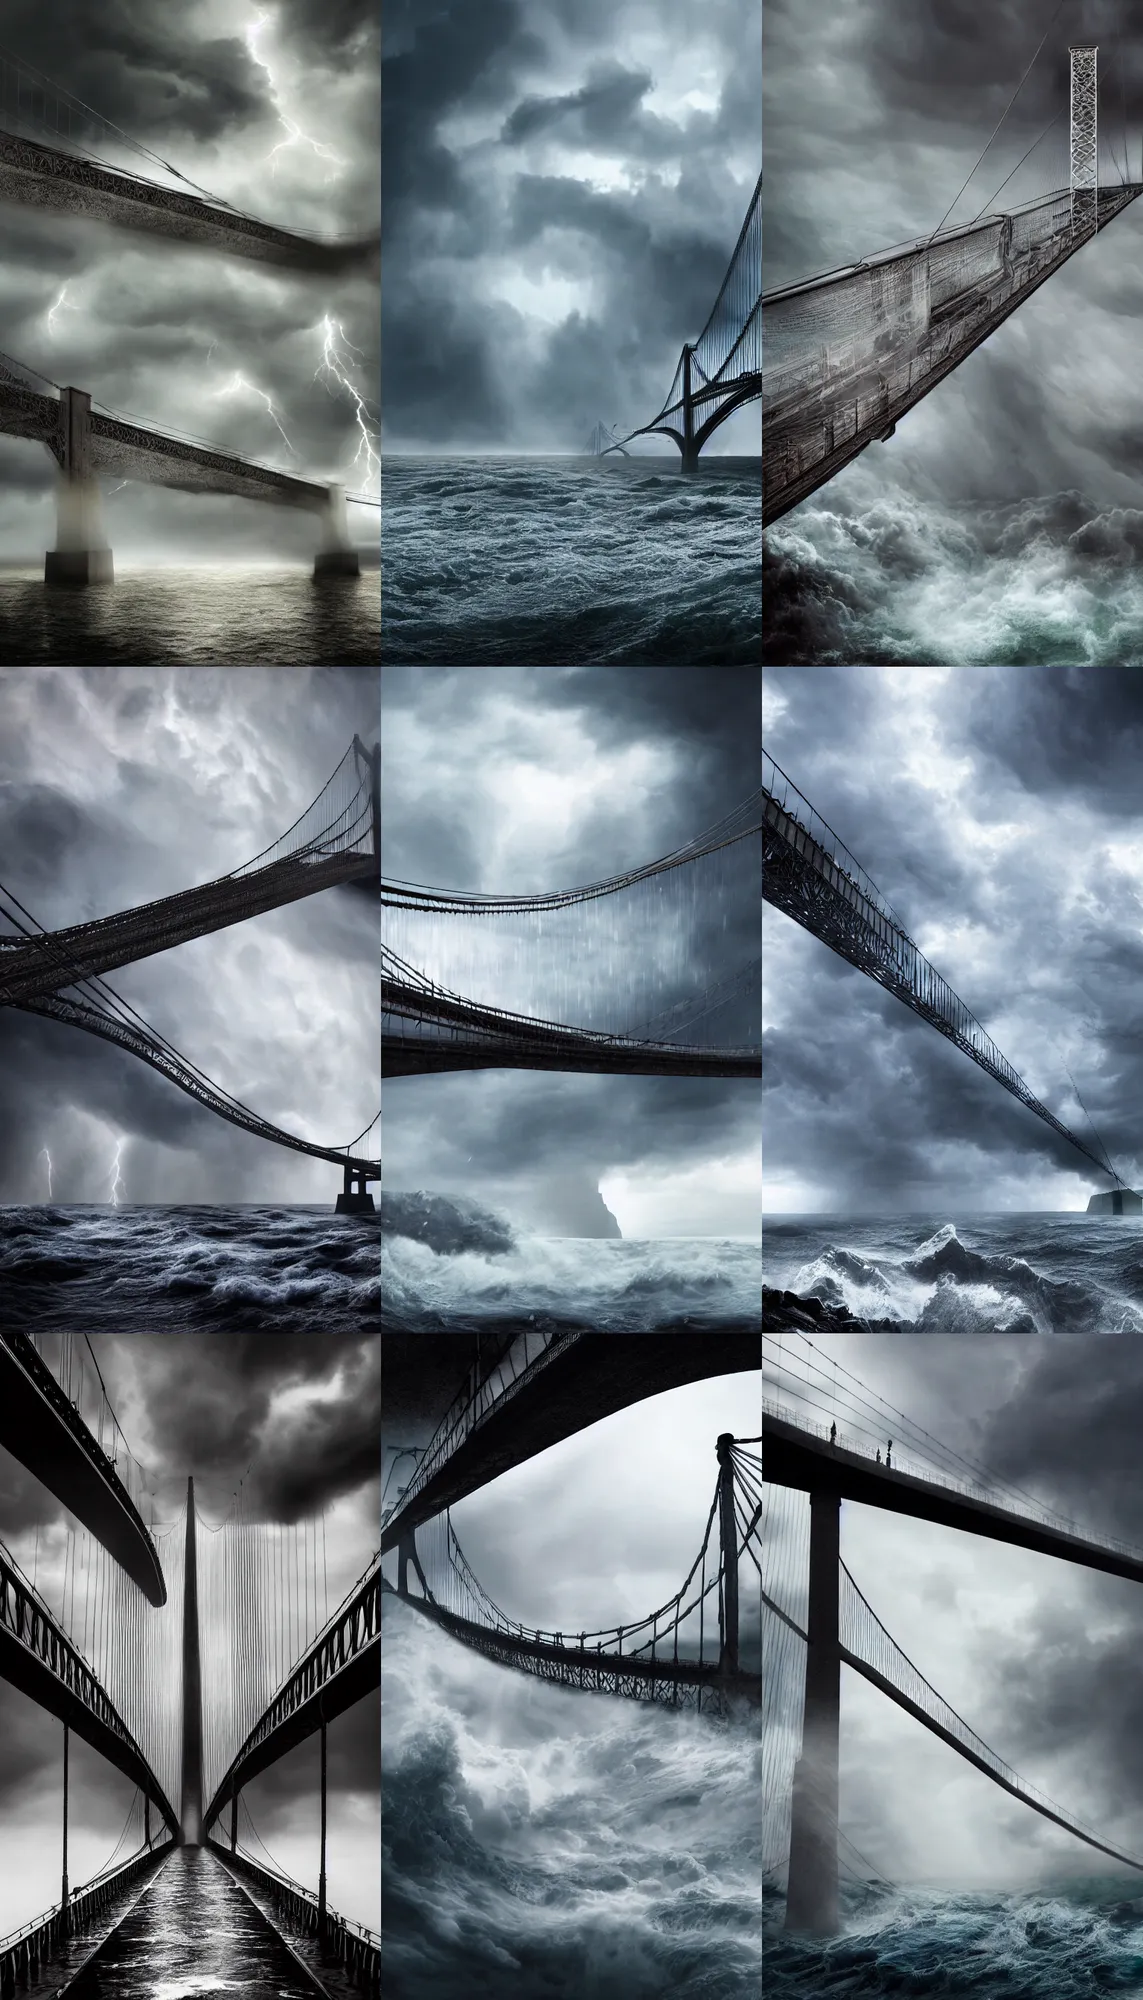 Prompt: Epic Realistic Eerie picture of a huge suspension bridge over stormy ocean, ocean waves, storm, lighting, beautiful detailed stormy clouds over a huge bridge over troubled dark water, Elaborate, Highly Detailed Architecture trending on Artstation hyperdetailed detailed matte painting Unreal Engine Art of Illusion mysterious ominous ethereal expansive, 4K 64 megapixels 8K resolution DSLR HDR Cinema 4D IMAX detailed hyperdetailed photorealistic concept art detailed painting deviantart hyperrealism trending on Artstation Unreal Engine,landscape polished photorealistic landscape polished photorealistic Photorealism, lifelike Geometric, realistic, amazing depth expansive realistic photo-like painting by Caspar David,highly intricate, sophisticated and complex digital painting, hyperrealism, Cinema 4D, 8k resolution, 64 megapixels, CGSociety, ZBrushCentral, behance HD, hypermaximalist, a masterpiece,erie disturbing anxious epic amazing disturbing causing anxiety,soft focus macro lens macro photography panorama golden hour filmic long exposure Art of Illusion Artrift AutoCAD rendered in Blender shadow depth Sketchlab r/Art deviantart